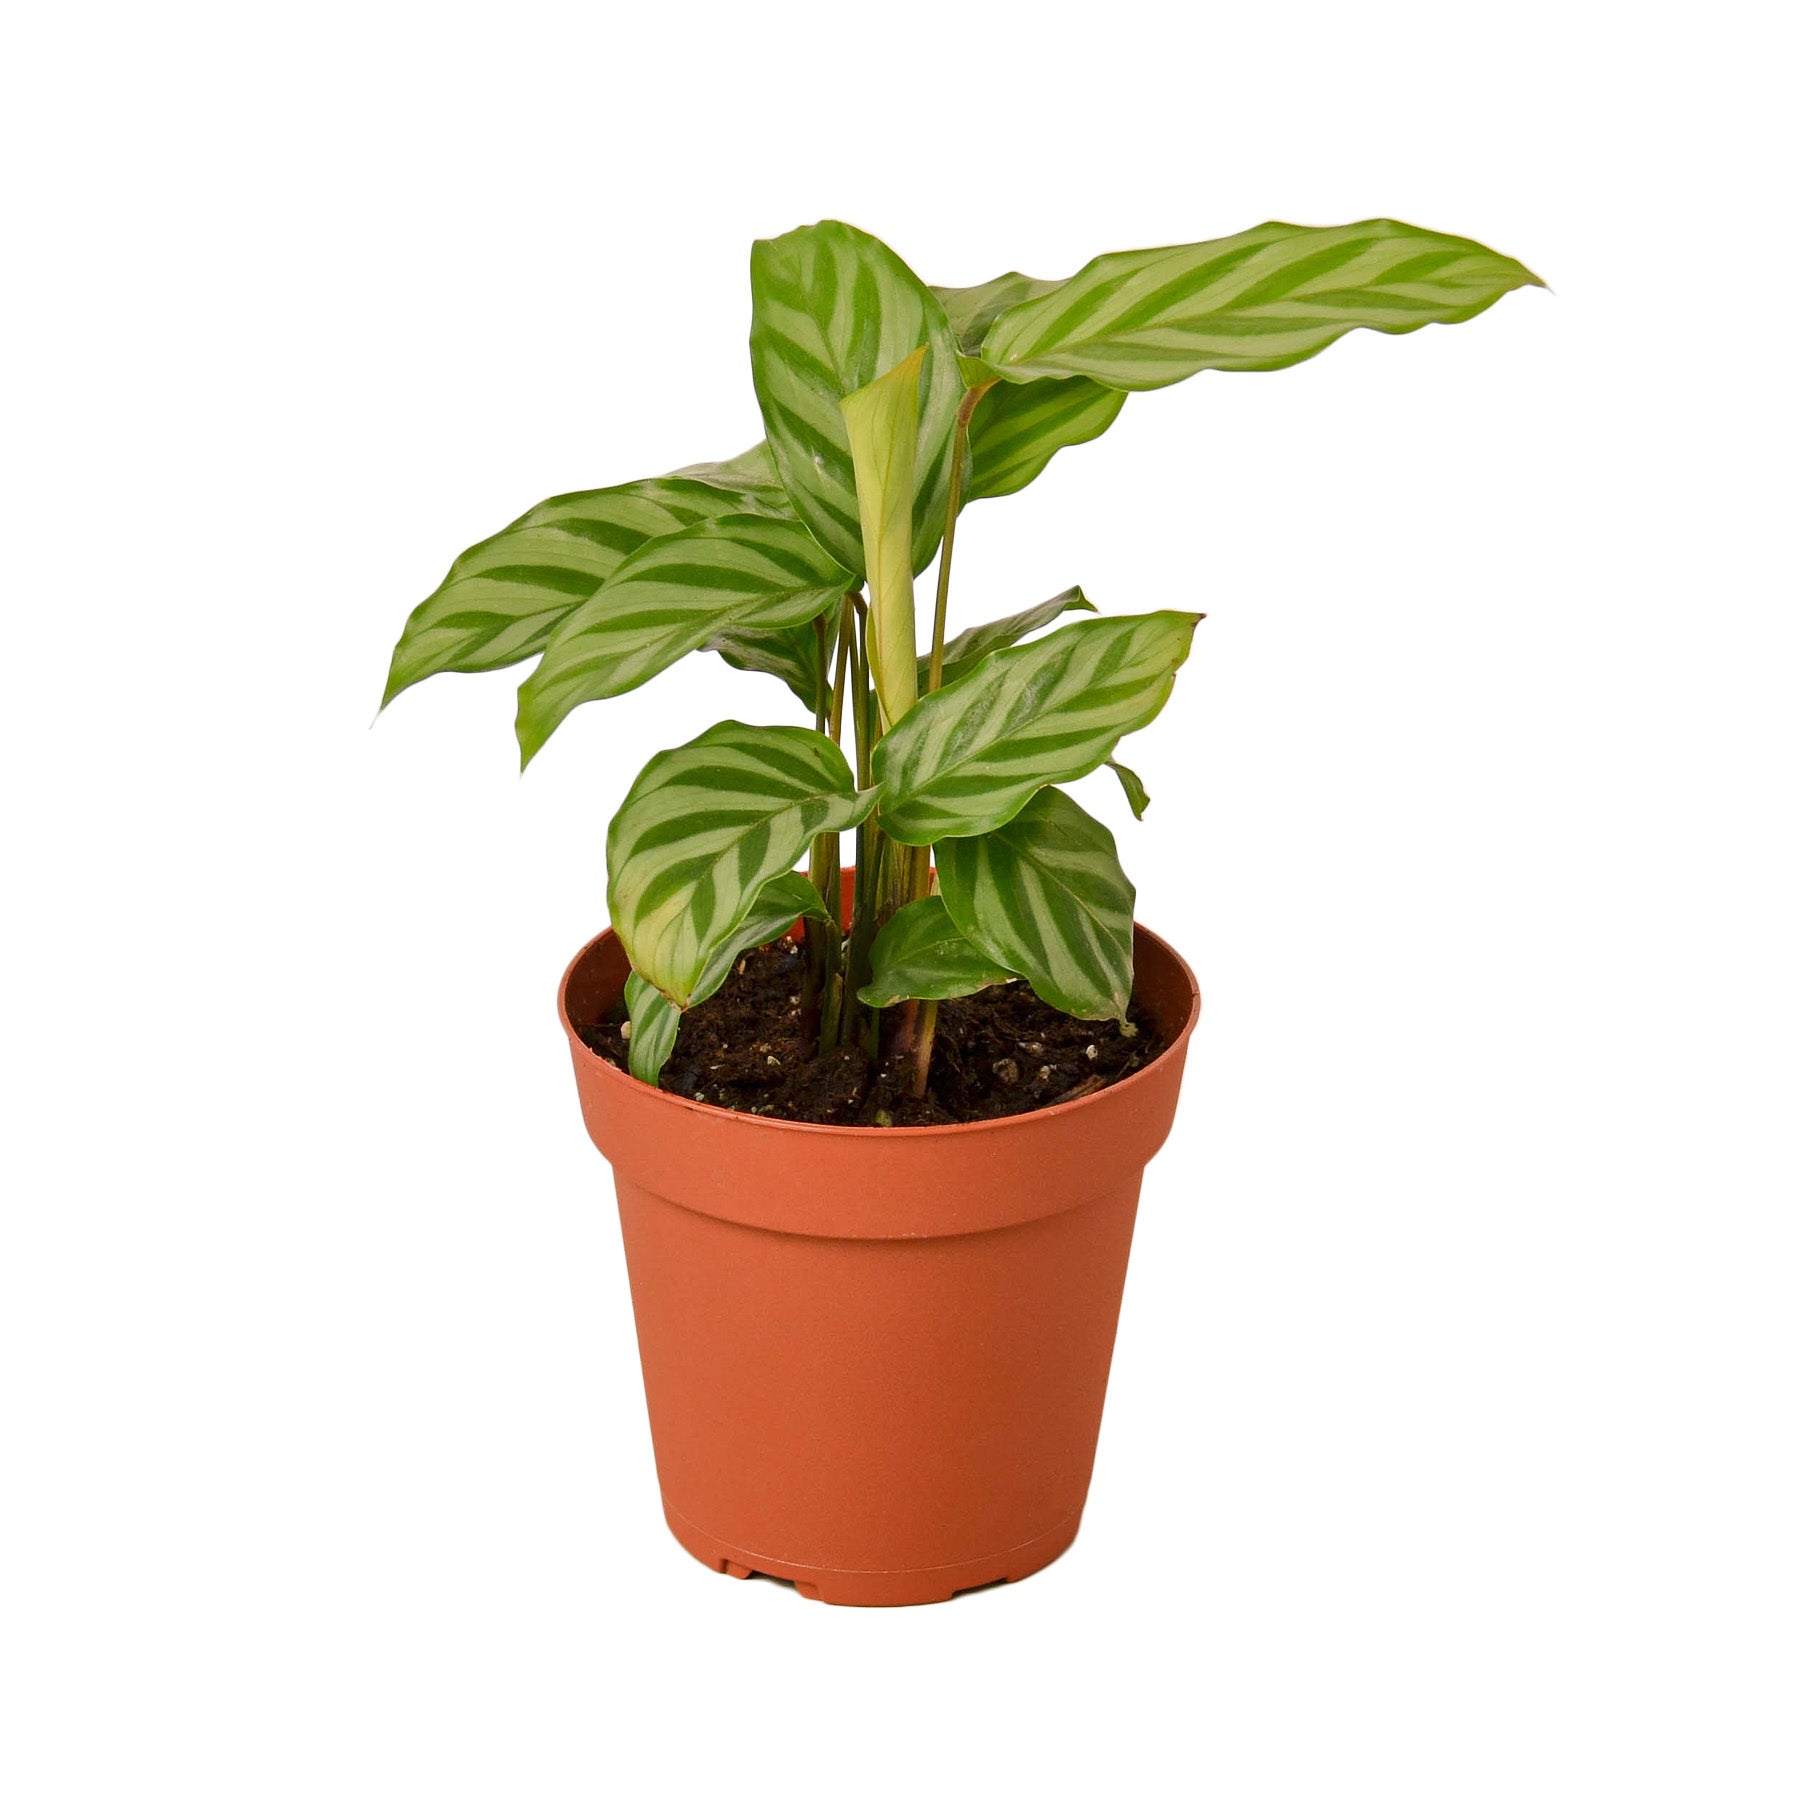 A small plant in a pot with a white background, ideal for the best plant nurseries near me.